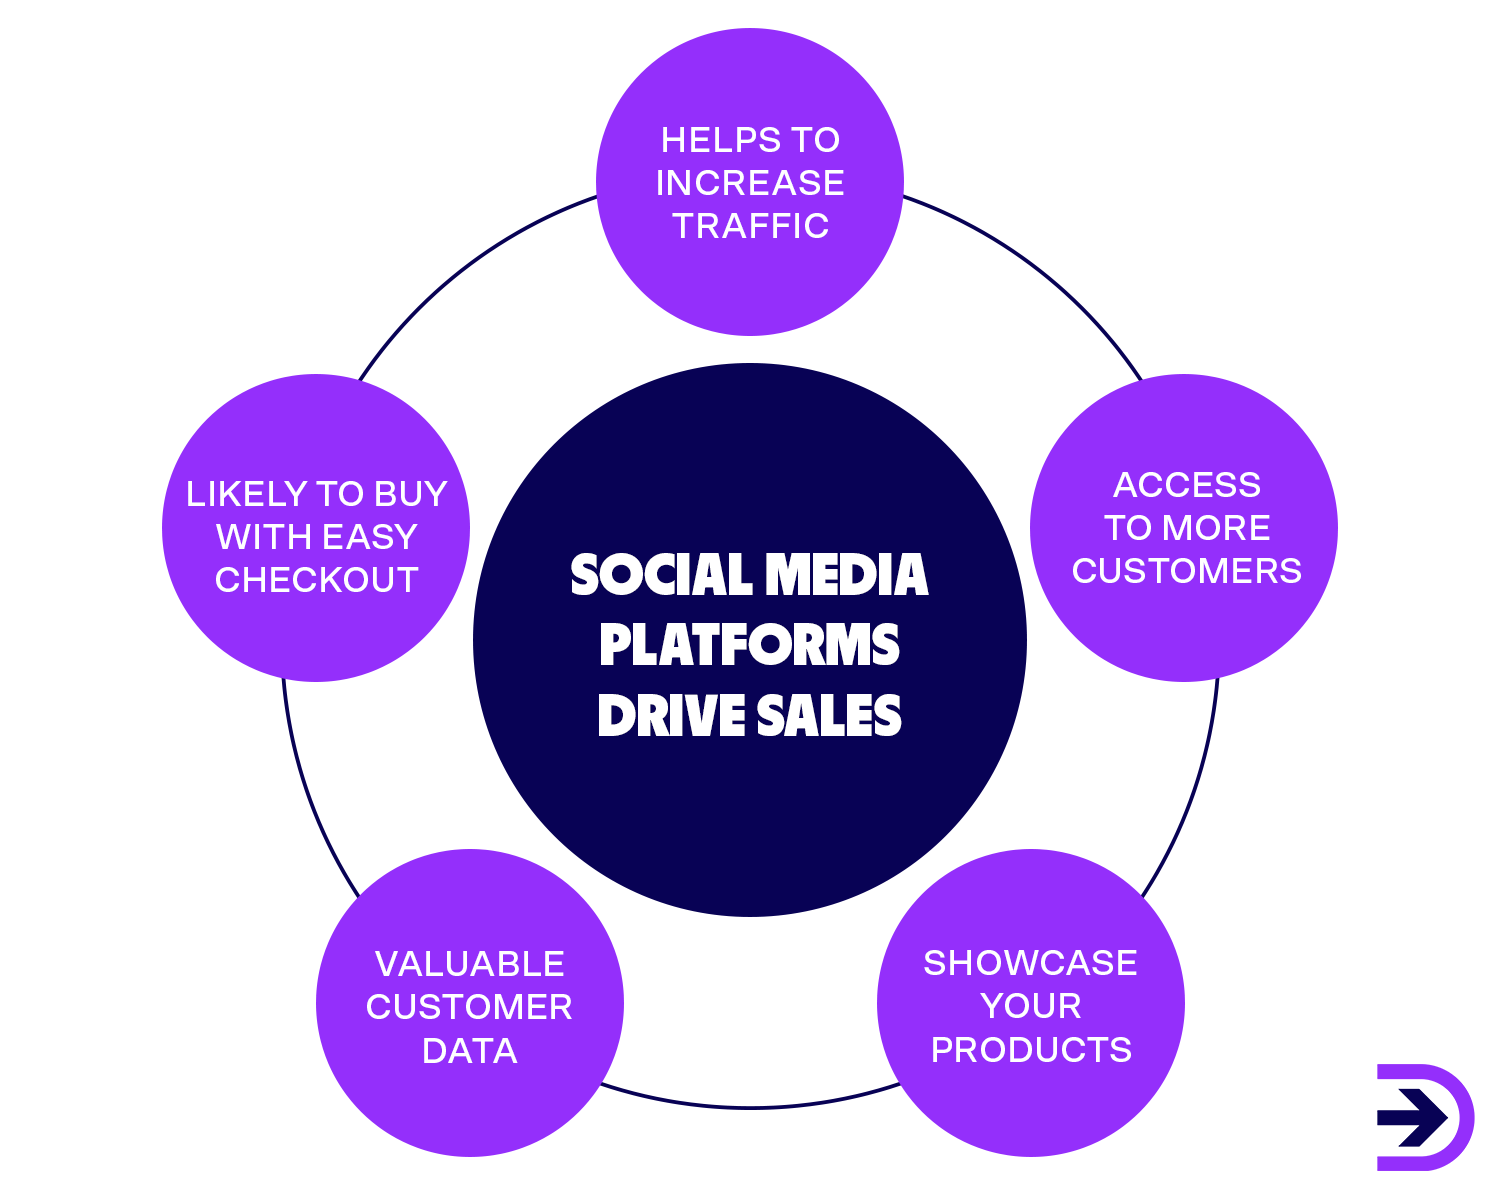 Utilising social media such as Facebook, Instagram and Tiktok can be highly beneficial to a dropshipping business. It can increase traffic and provide valuable customer data.